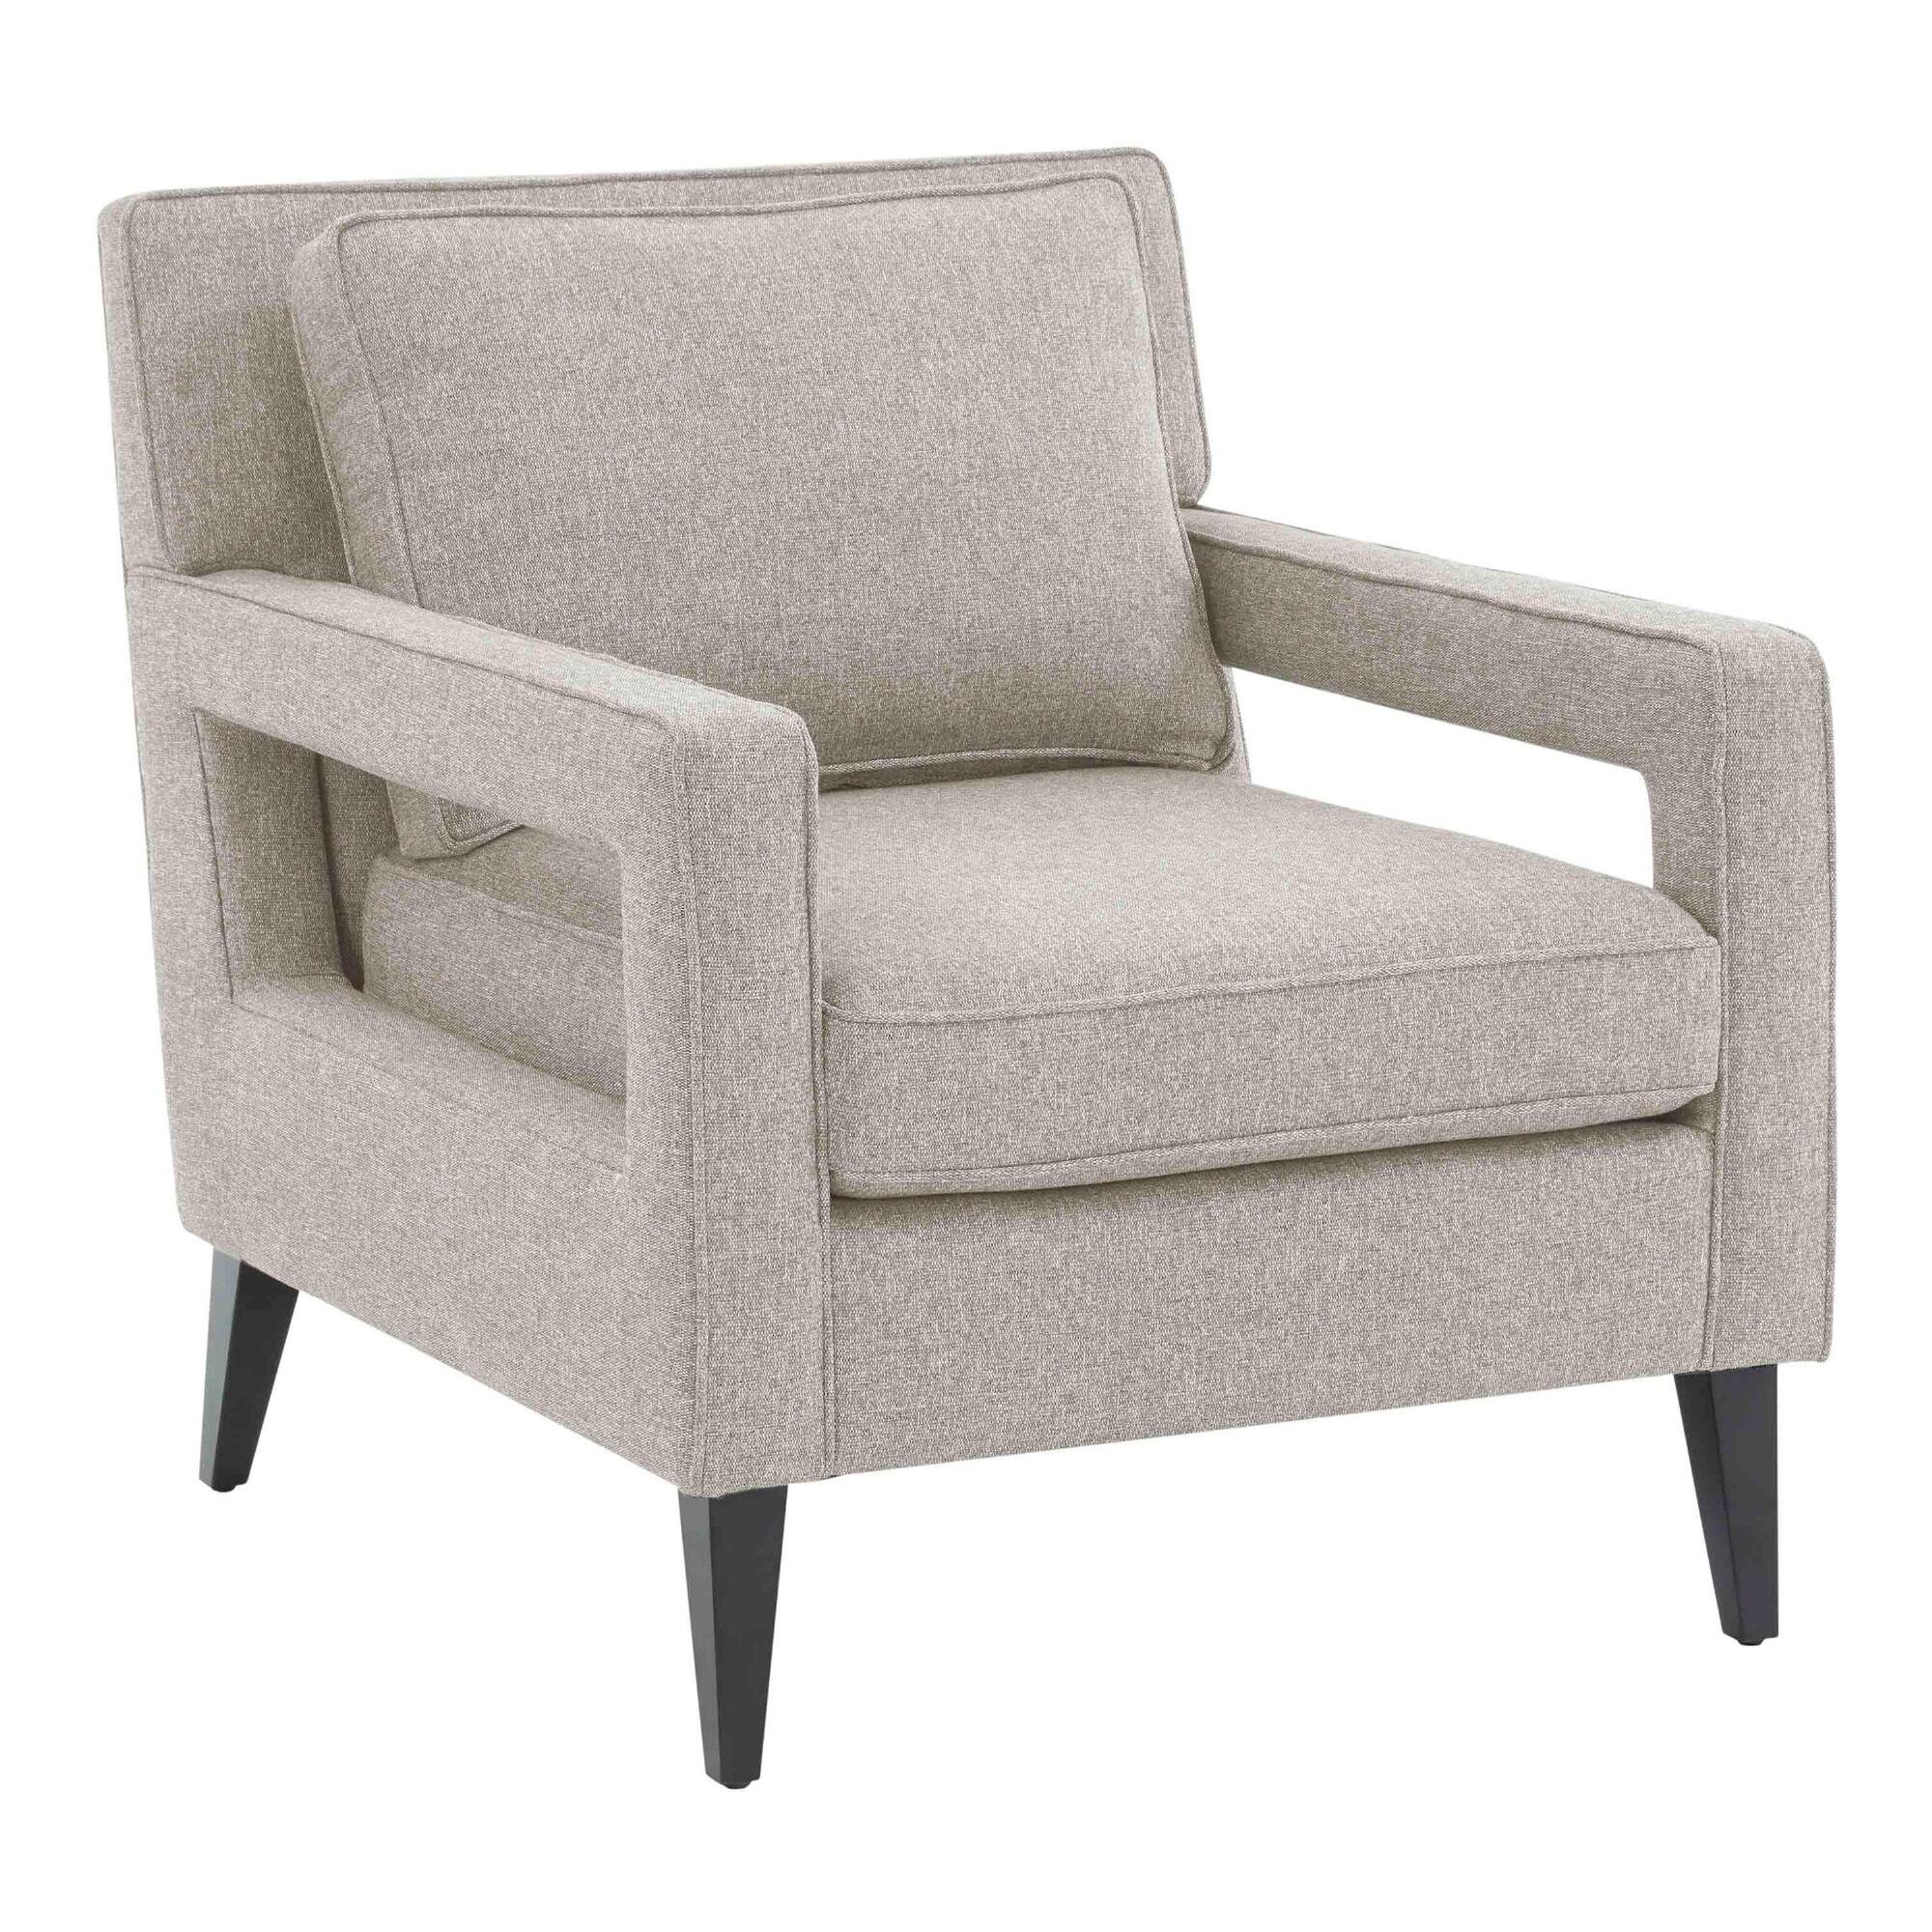 World Market - $449.99 - Enfield Tweed Upholstered Chair